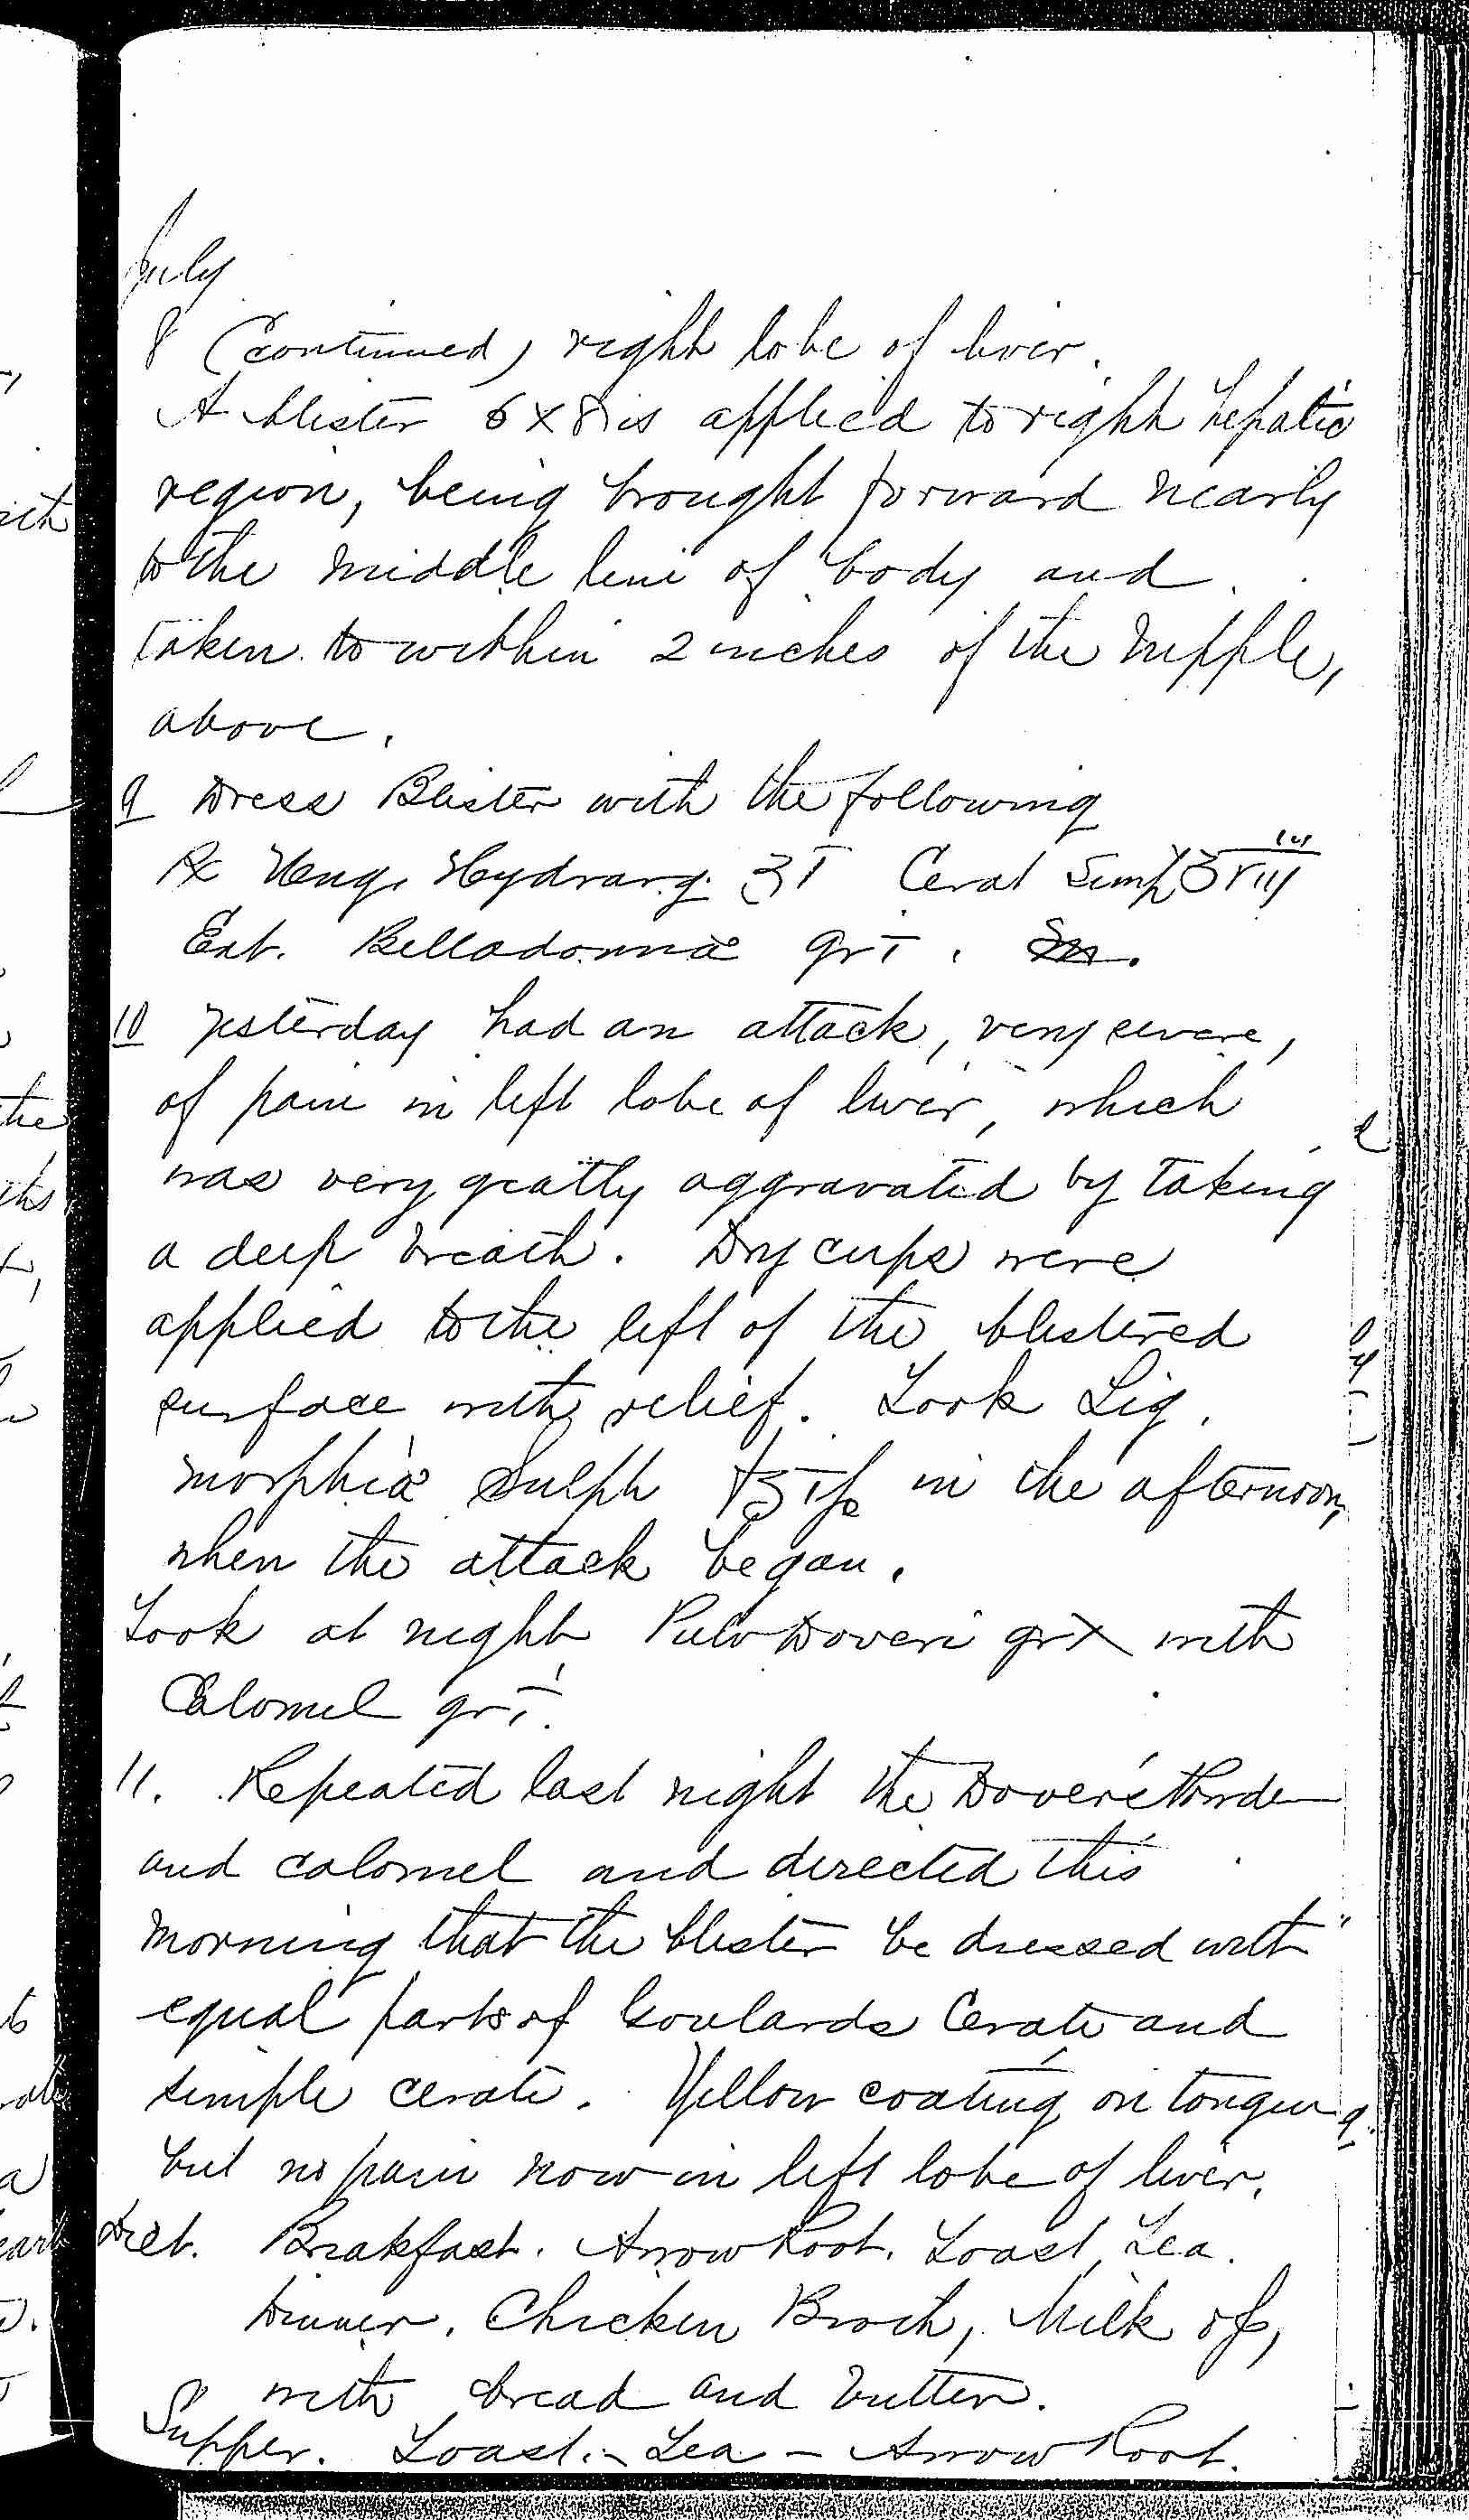 Entry for Richard Hearn (page 5 of 7) in the log Hospital Tickets and Case Papers - Naval Hospital - Washington, D.C. - 1868-69